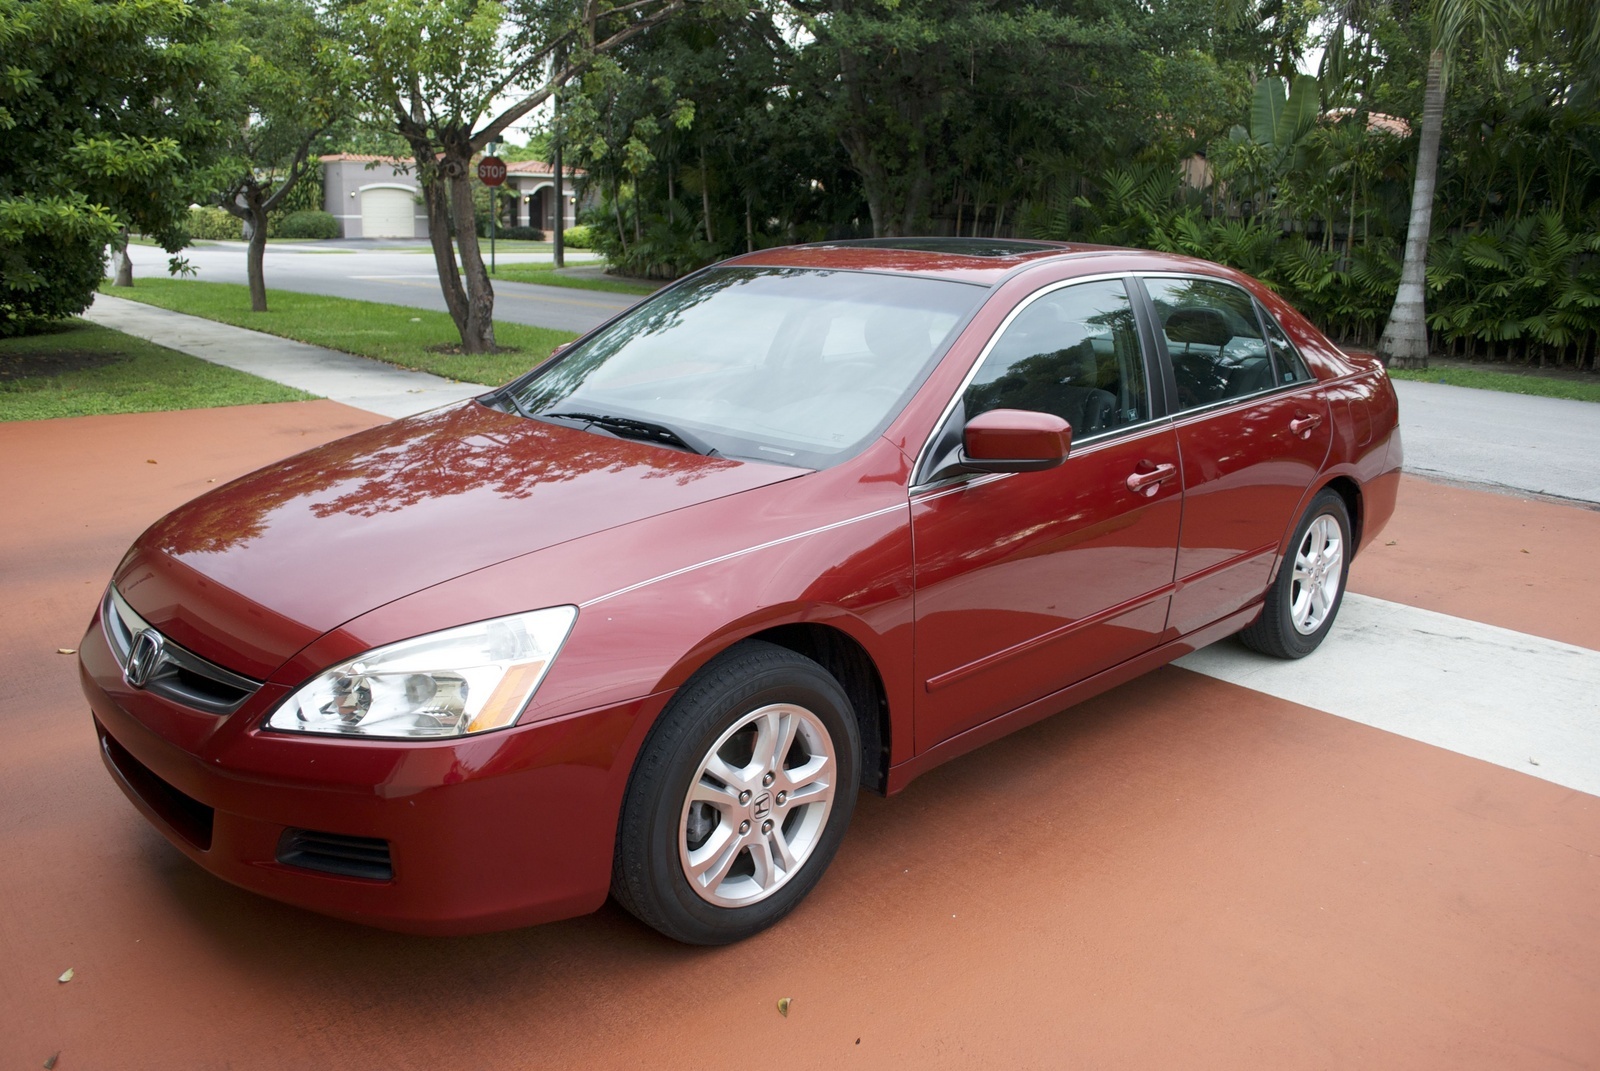 2003 Honda Accord Life Expectancy: Surpass the Norm!